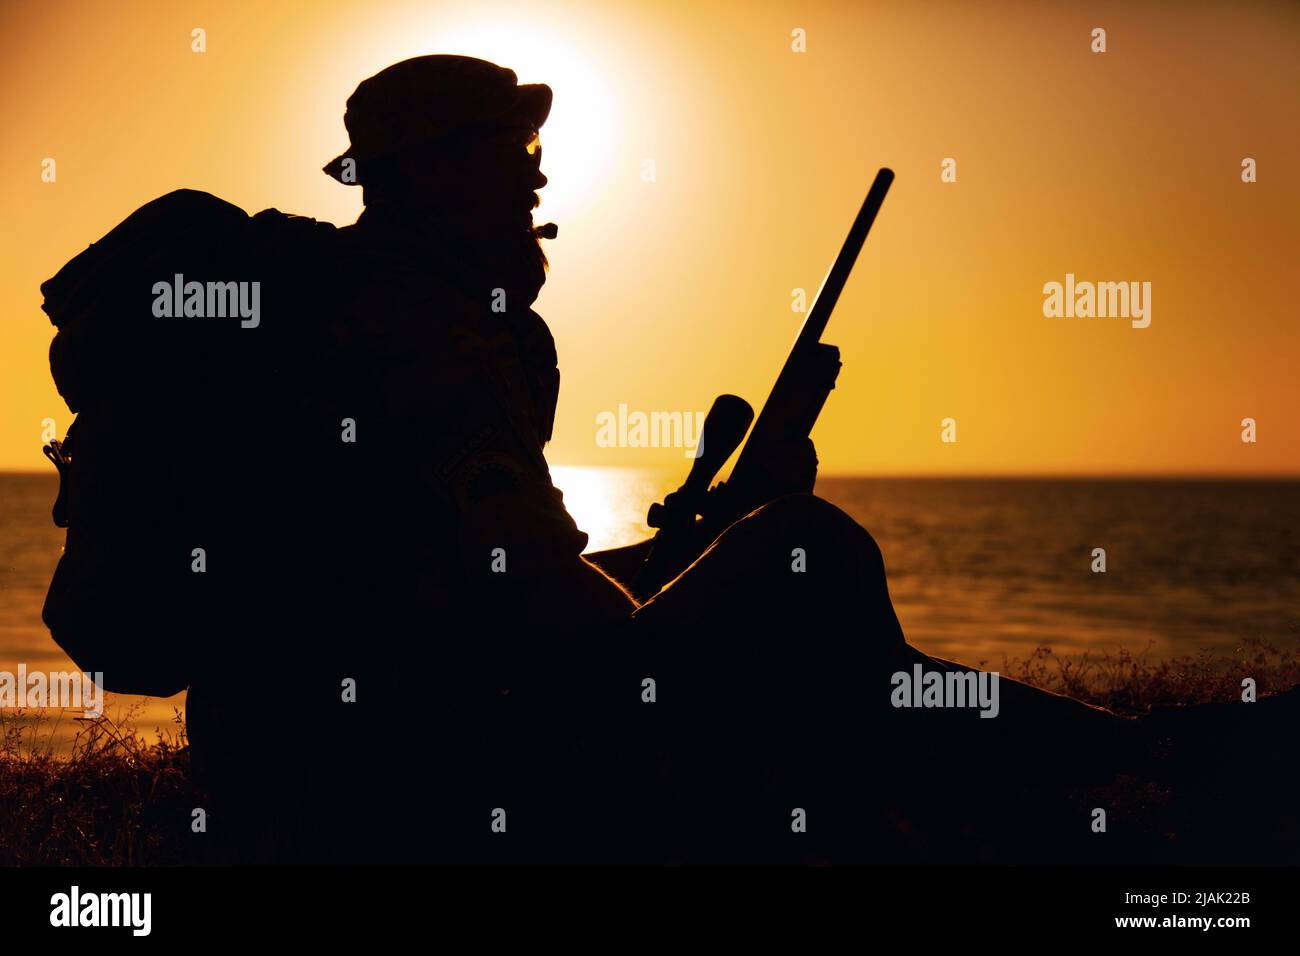 Silhouette of a special forces sniper sitting alert on the shoreline at sunset. Stock Photo